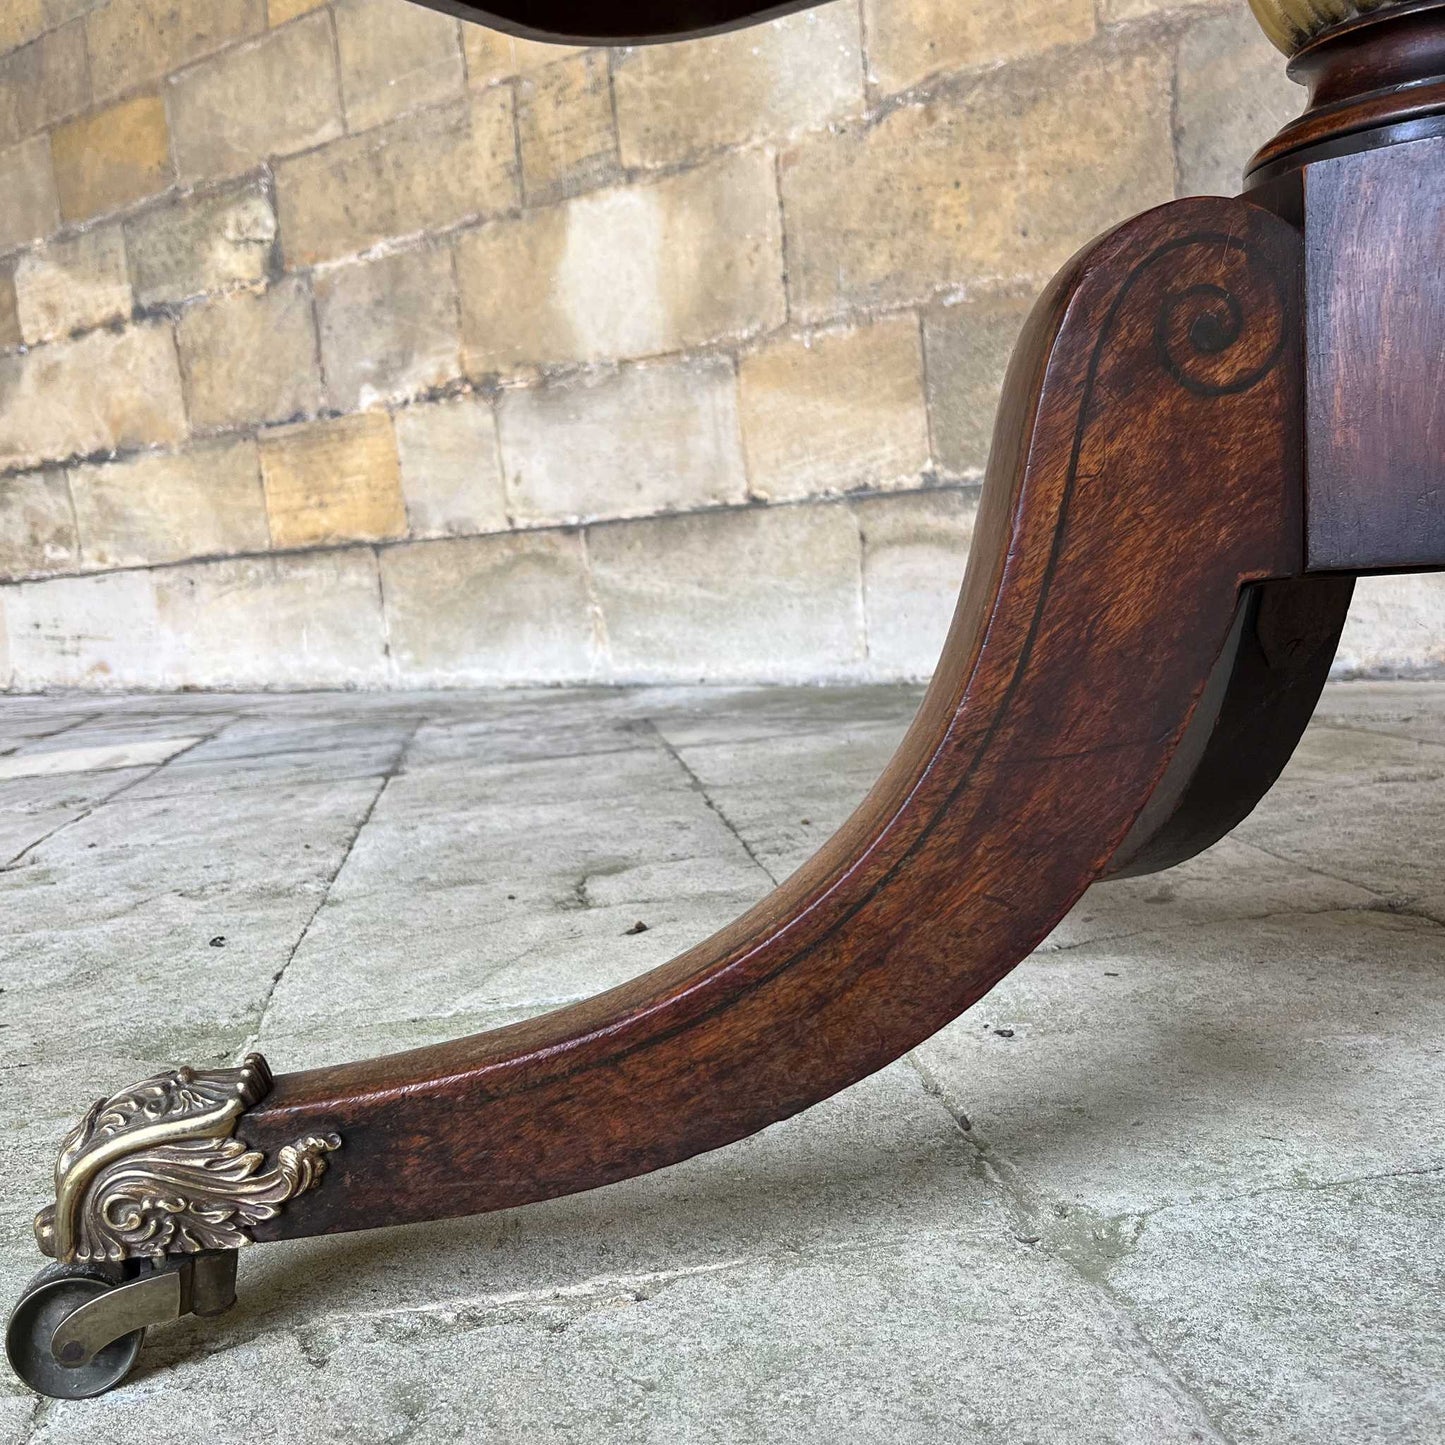 A fine Regency brass inlaid breakfast table, the rounded rectangular crossbanded tilt-top upon a turned and part gilt column support on four splayed legs with elegant tulipwood spiral inlay, showing a patina and wear commensurate with age and use, otherwise in very good condition